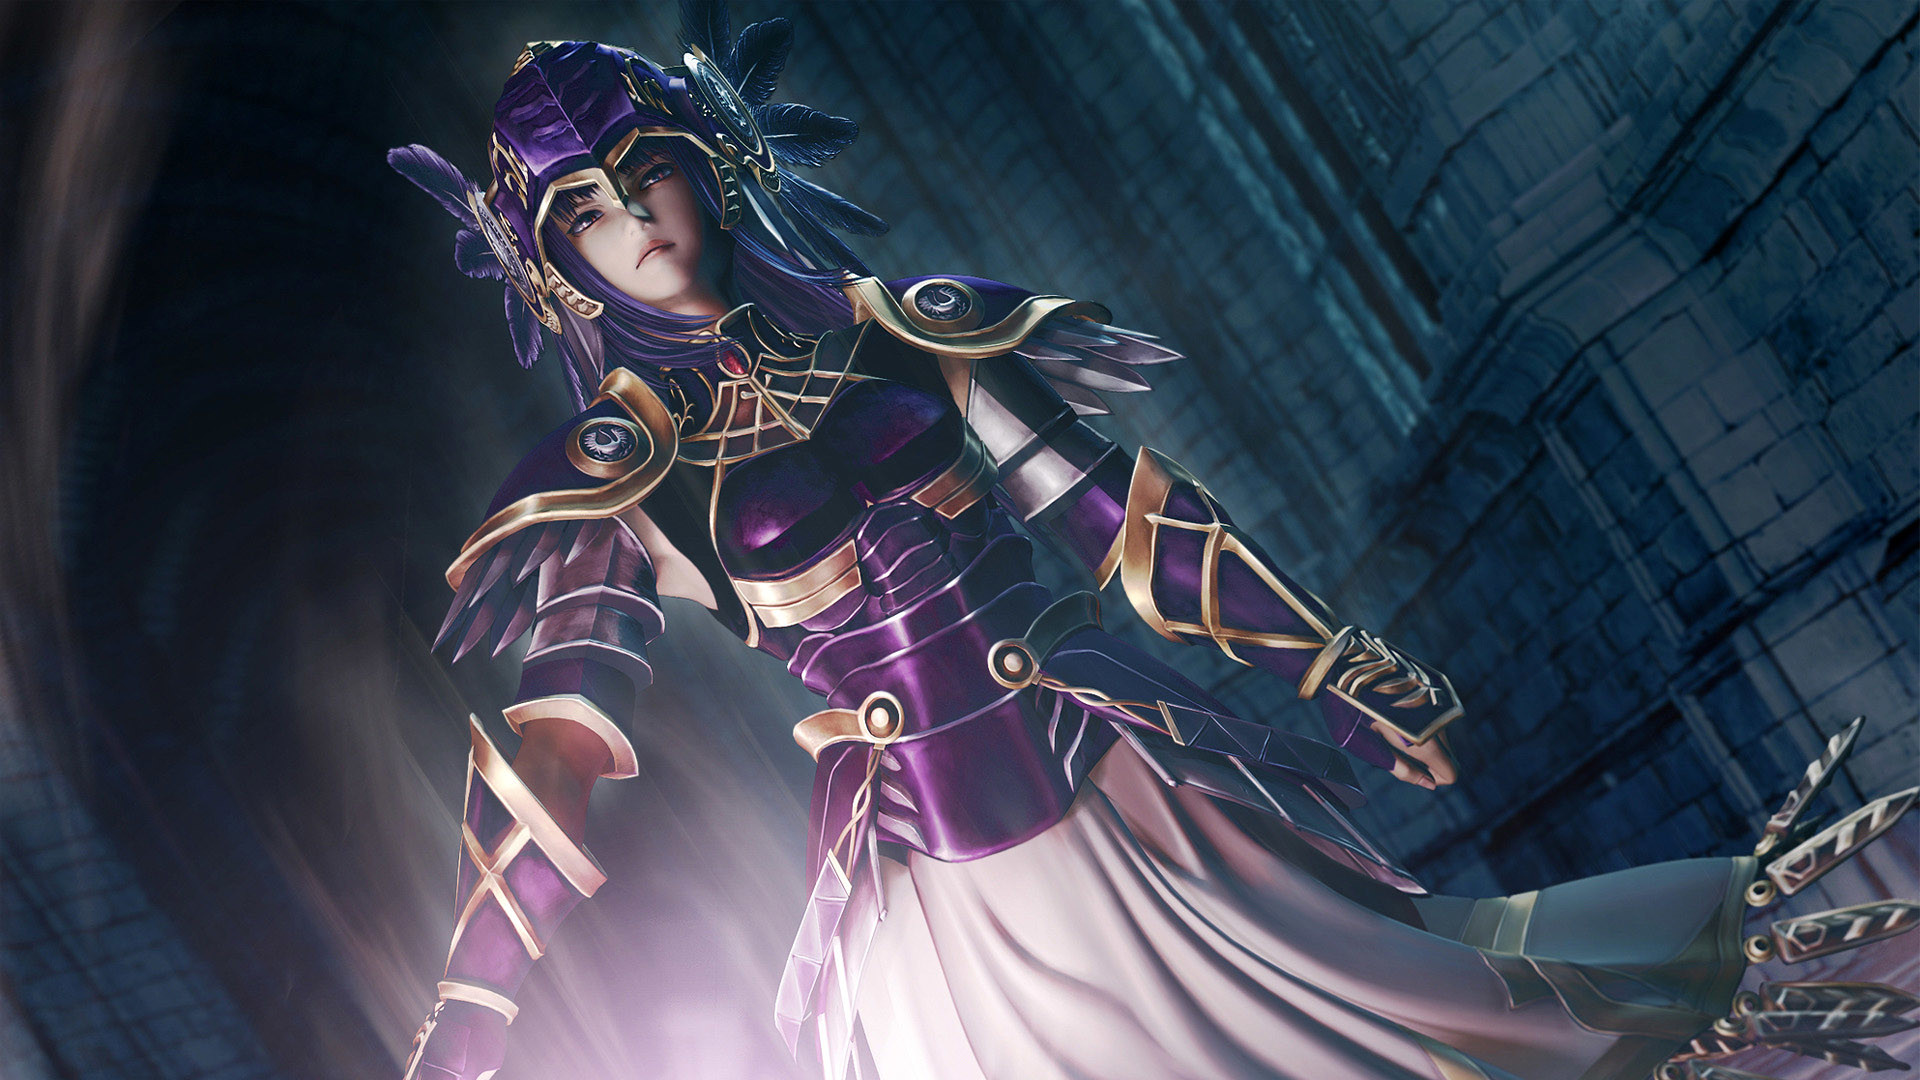 1920x1080 Video Game - Valkyrie Profile Medieval Wallpaper